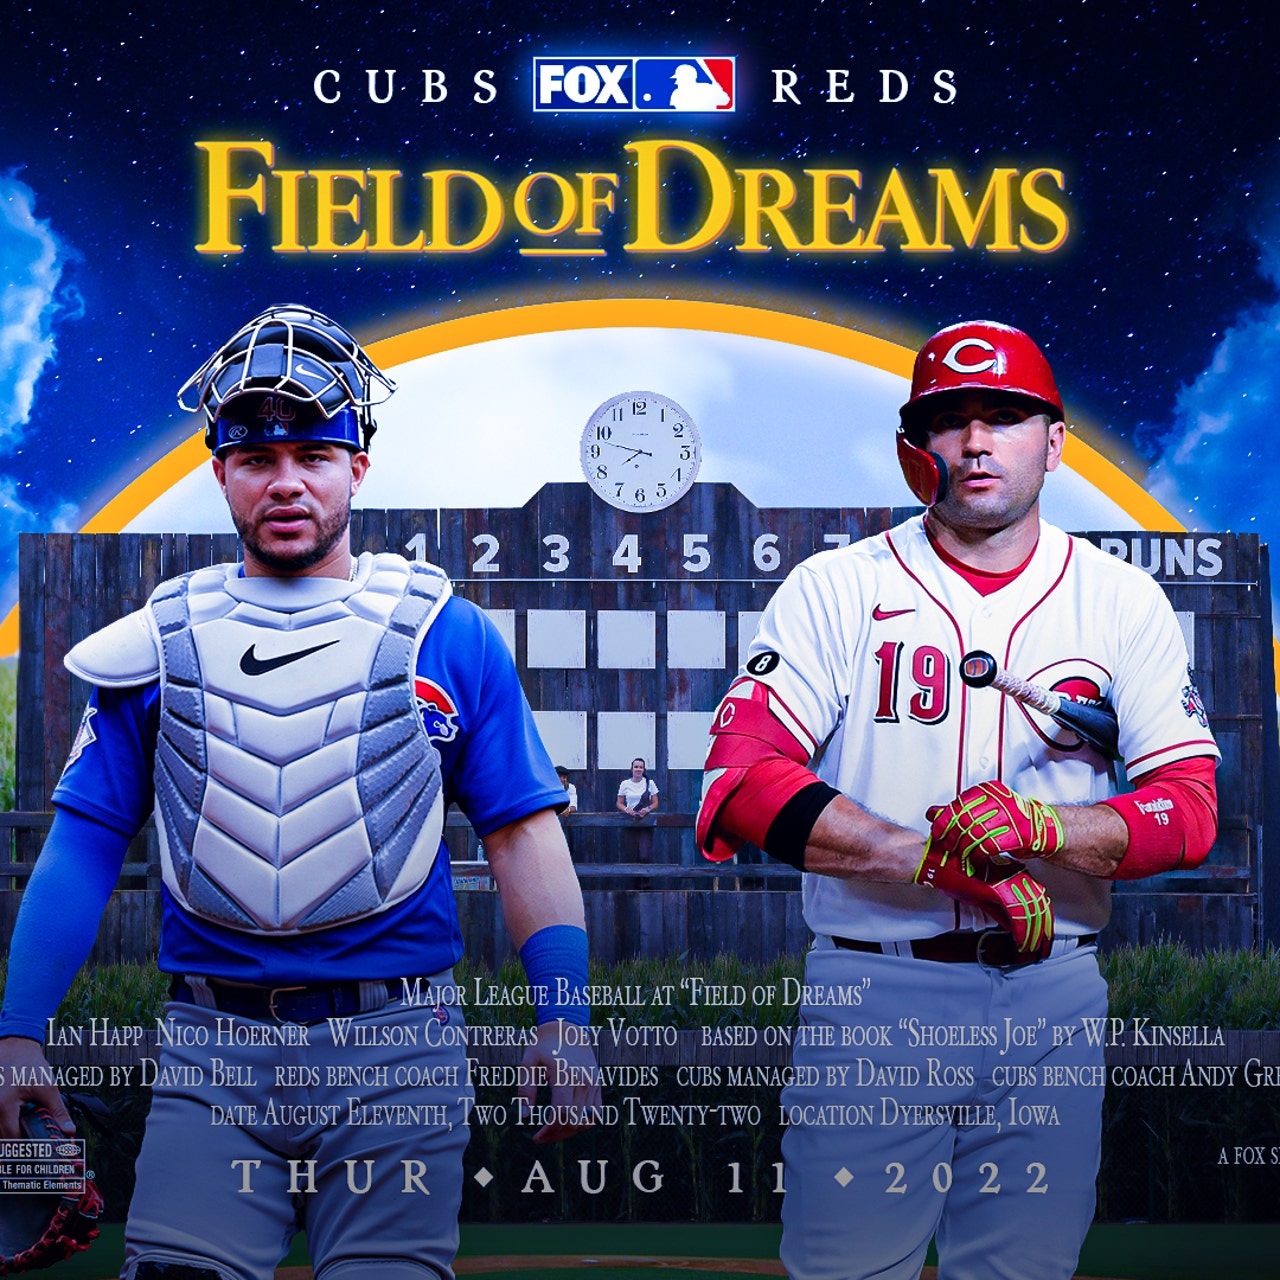 reds and cubs field of dreams uniforms